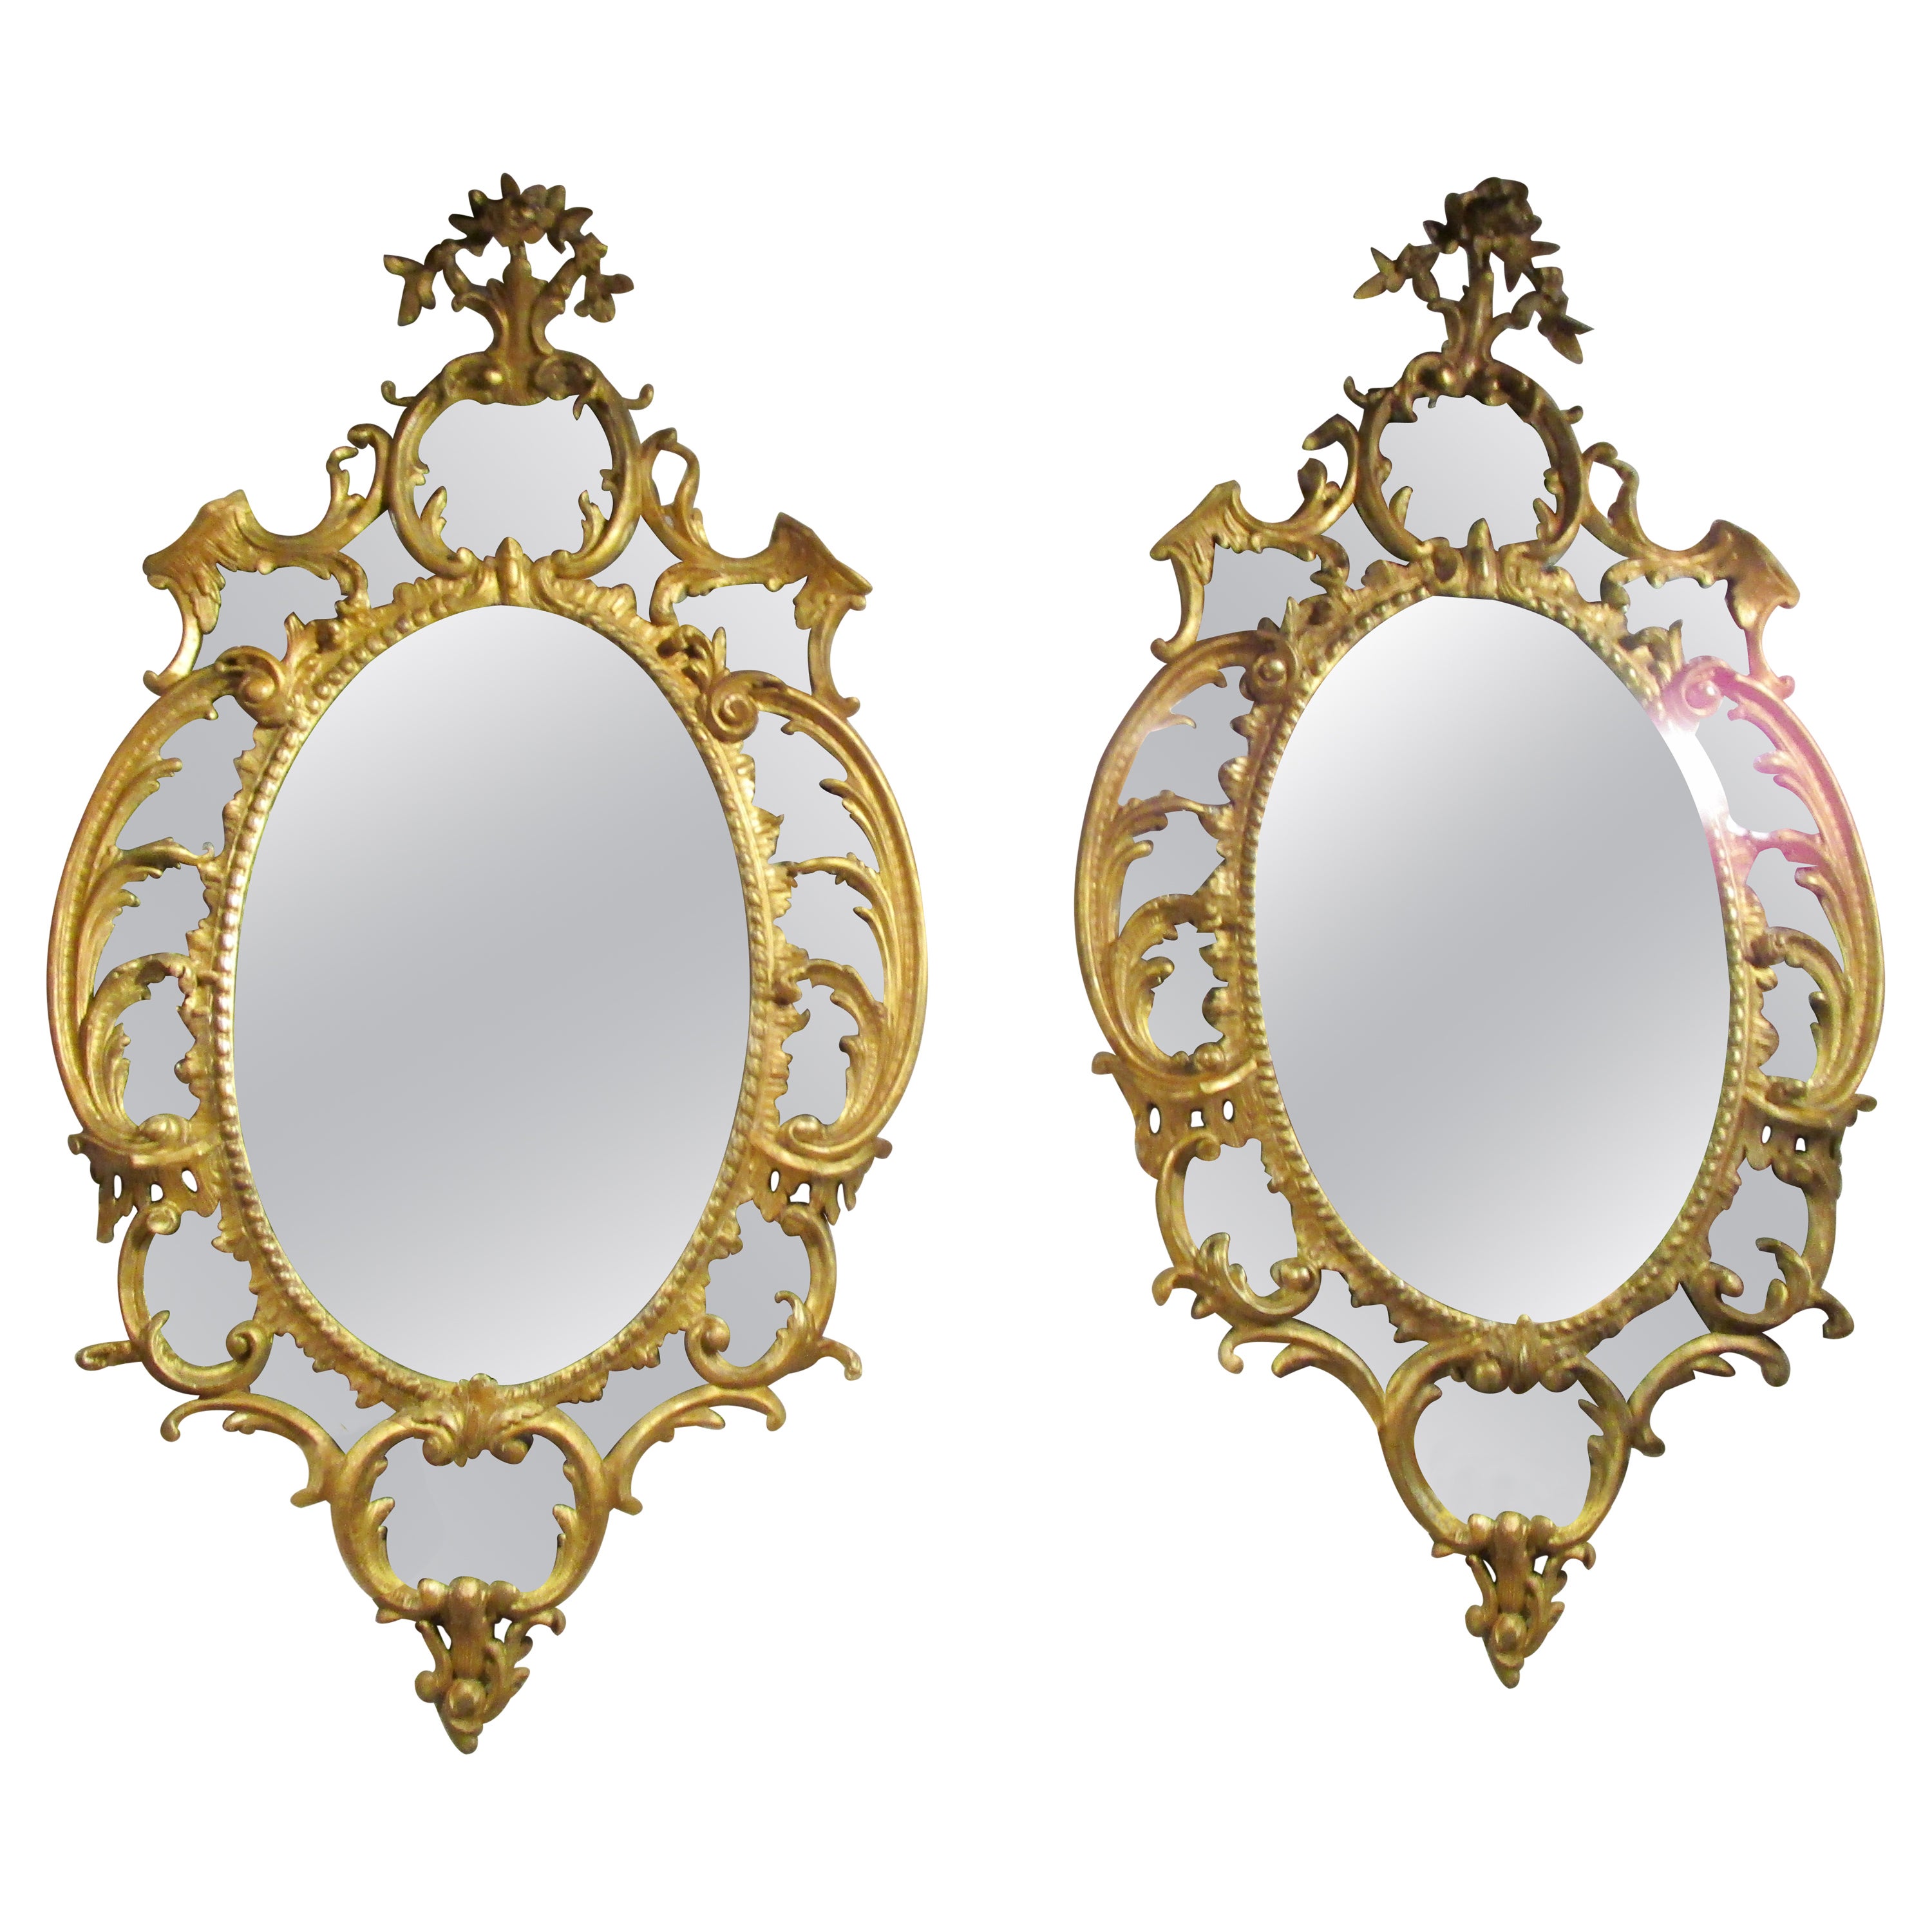 A fine and rare pair of late 18th century George 111 gilt carved large mirrors. ( Provenance East Lothian Scotland estate ).
 